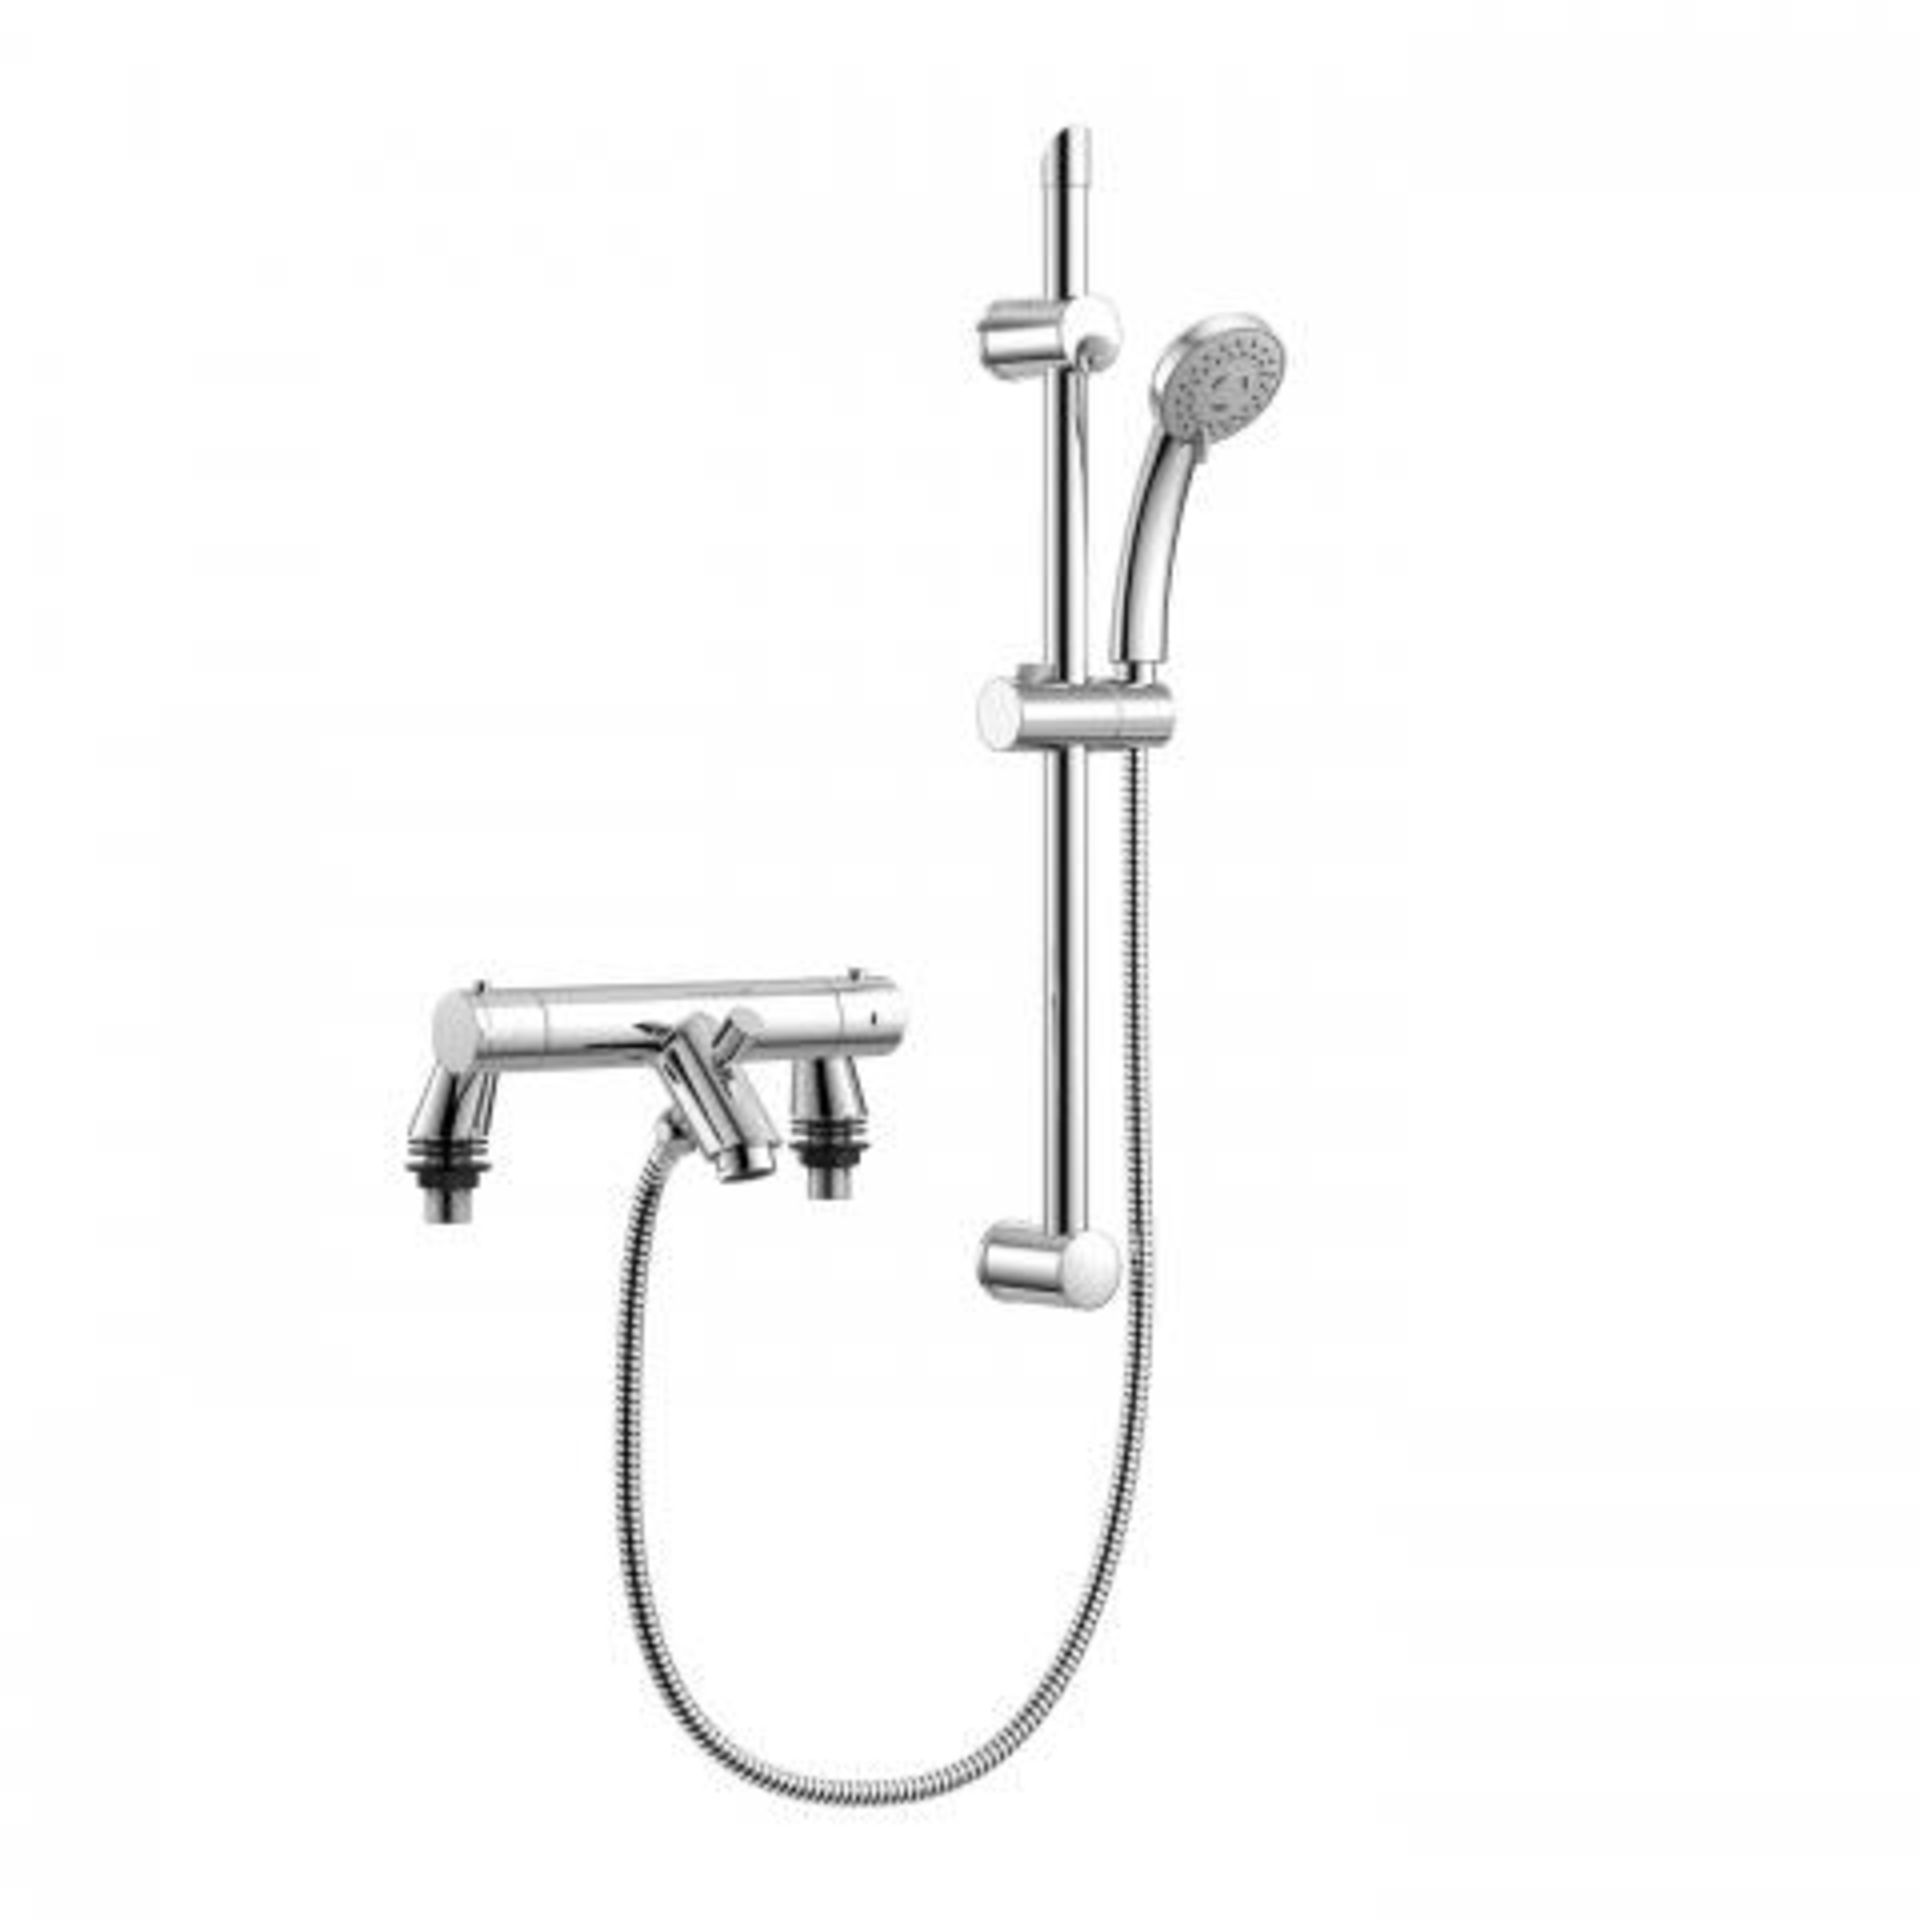 (I51) Round 3 Function Thermostatic Bar Mixer Kit with Designer Bath Filler RRP £249.99 Echoing - Image 4 of 6